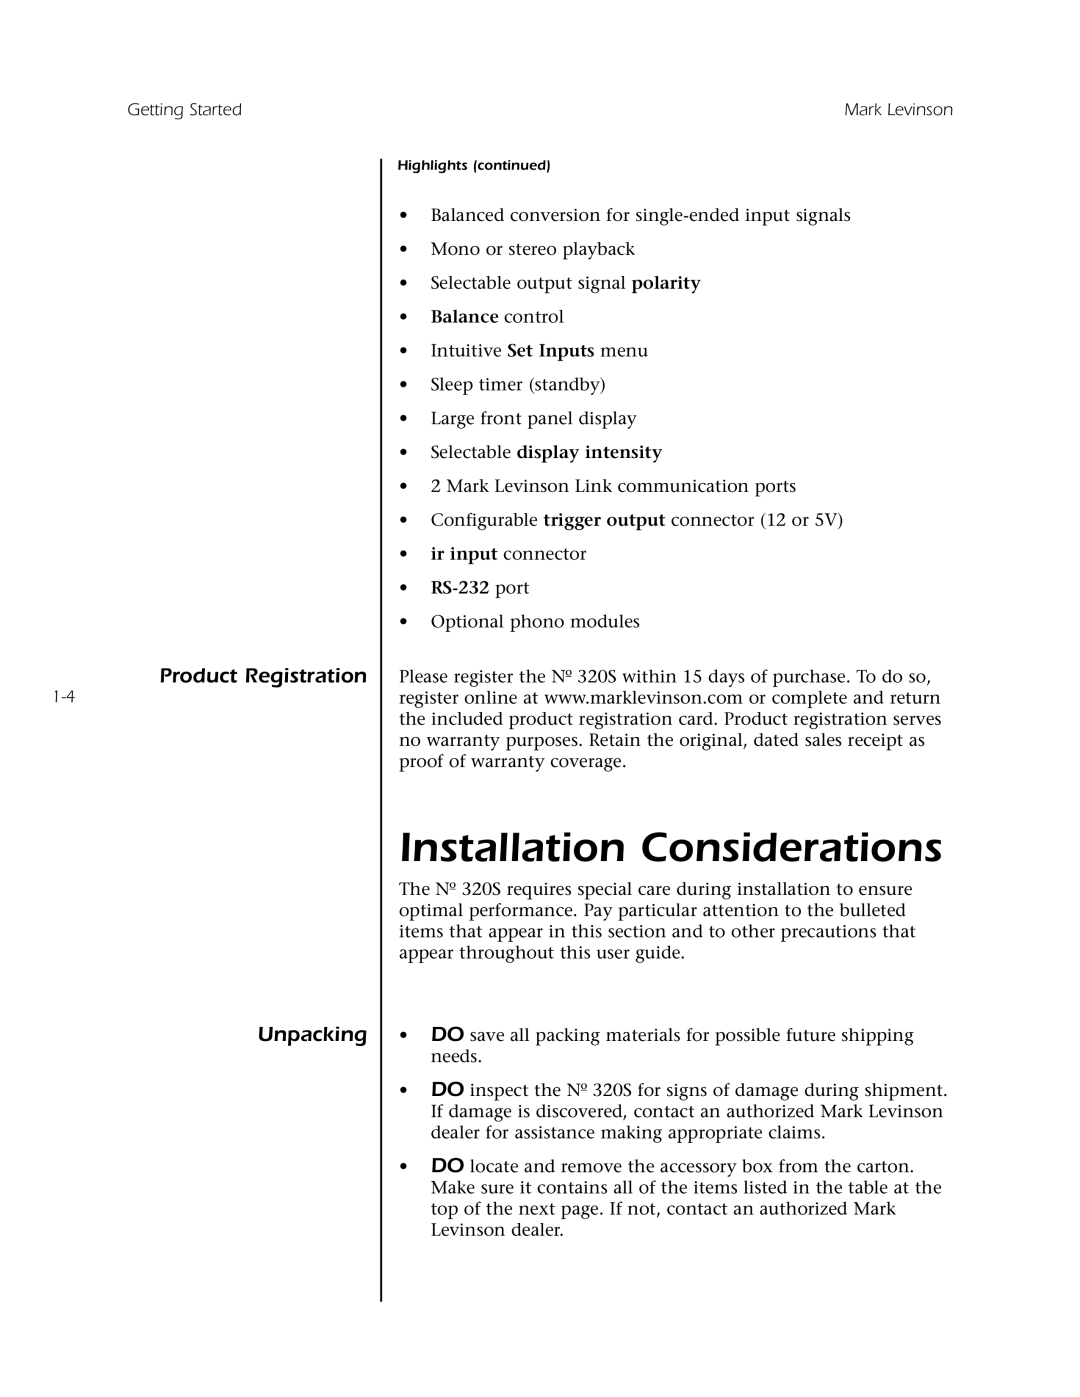 Mark Levinson N 320S owner manual Installation Considerations, Product Registration, Unpacking, •Balance control 